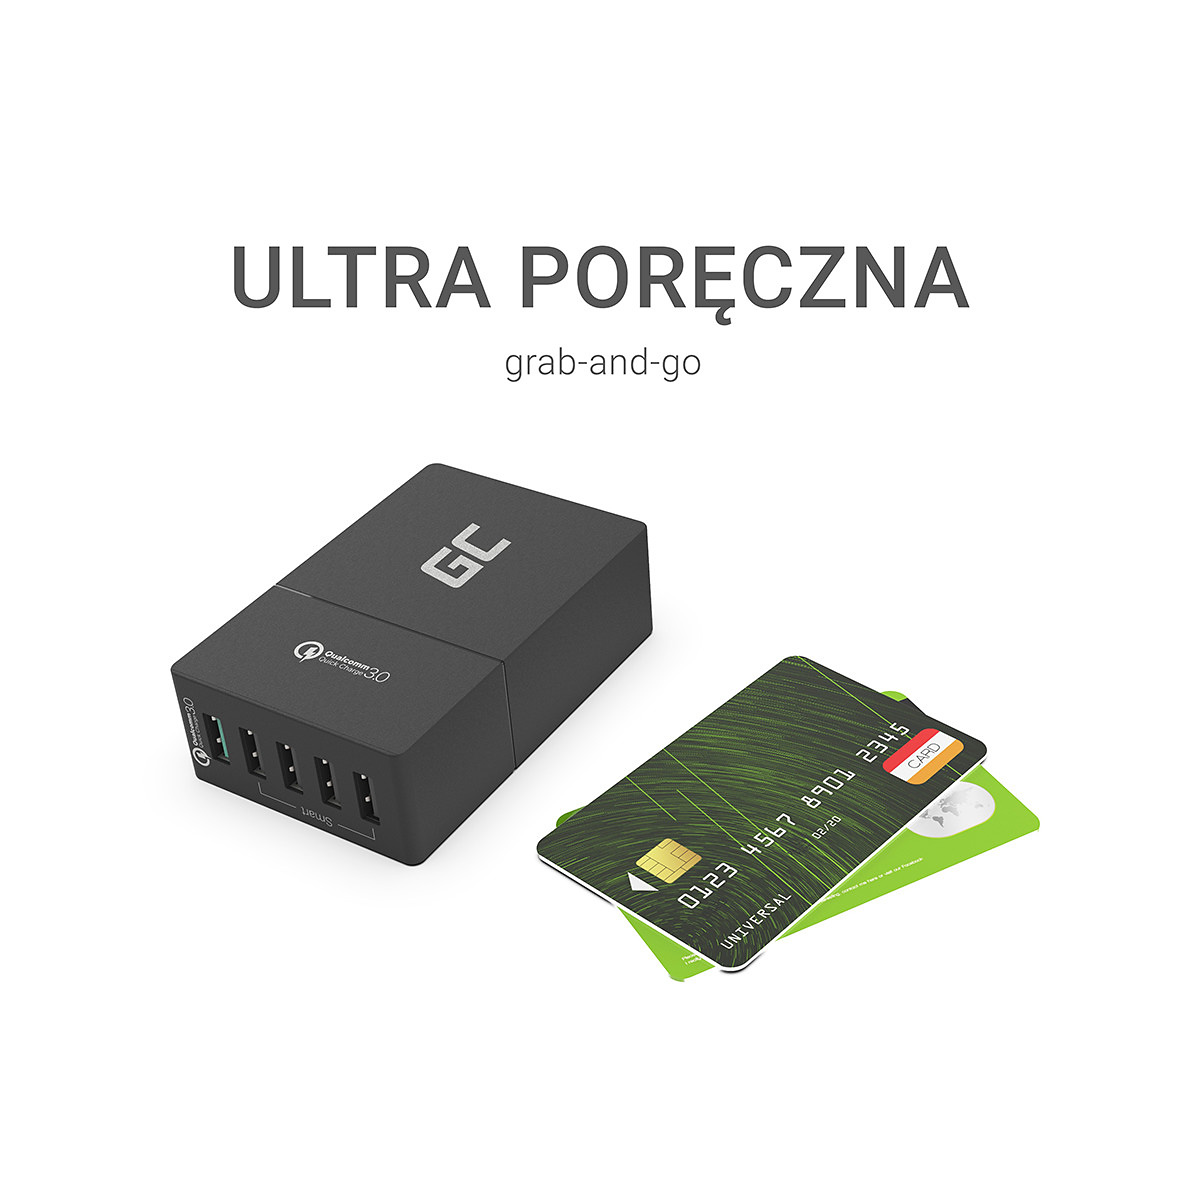 Green Cell Charger 5xUSB Quick Charge 3.0